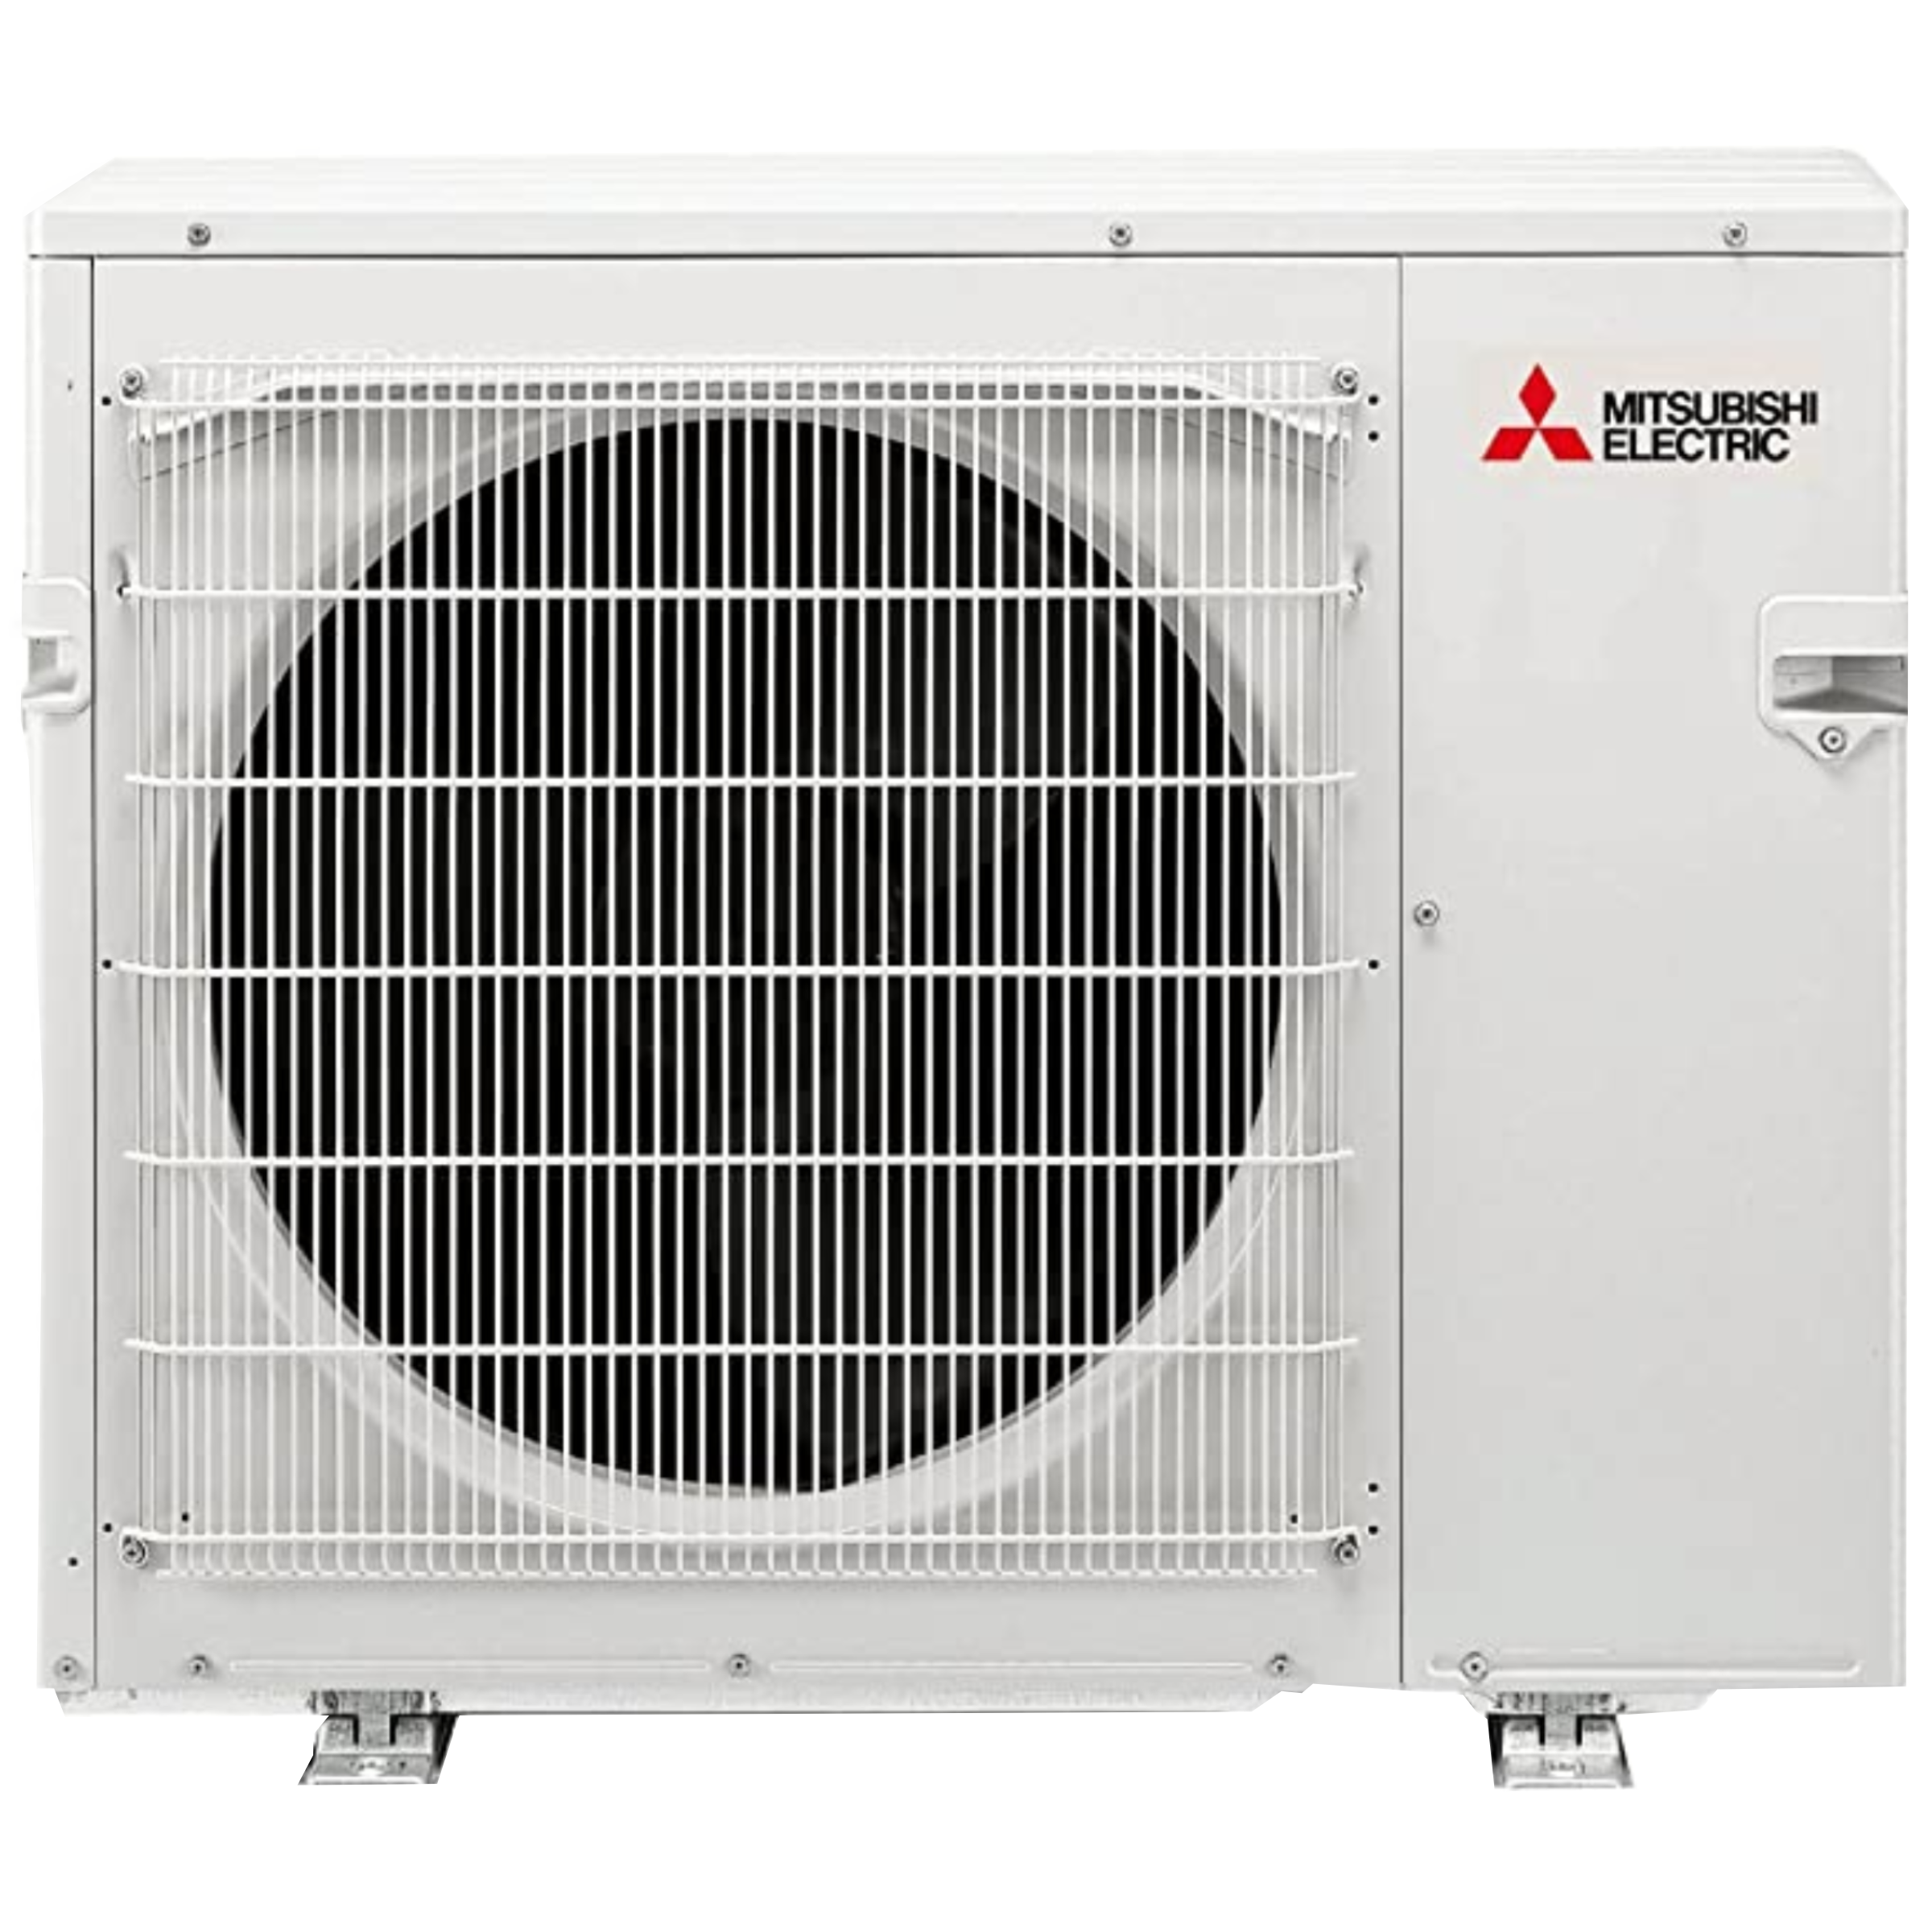 Mitsubishi D-Series 16 SEER Single-Zone Ductless Split System Wall Mounted Cooling Only Air Conditioner  30700 BTU, 230V, R-410A